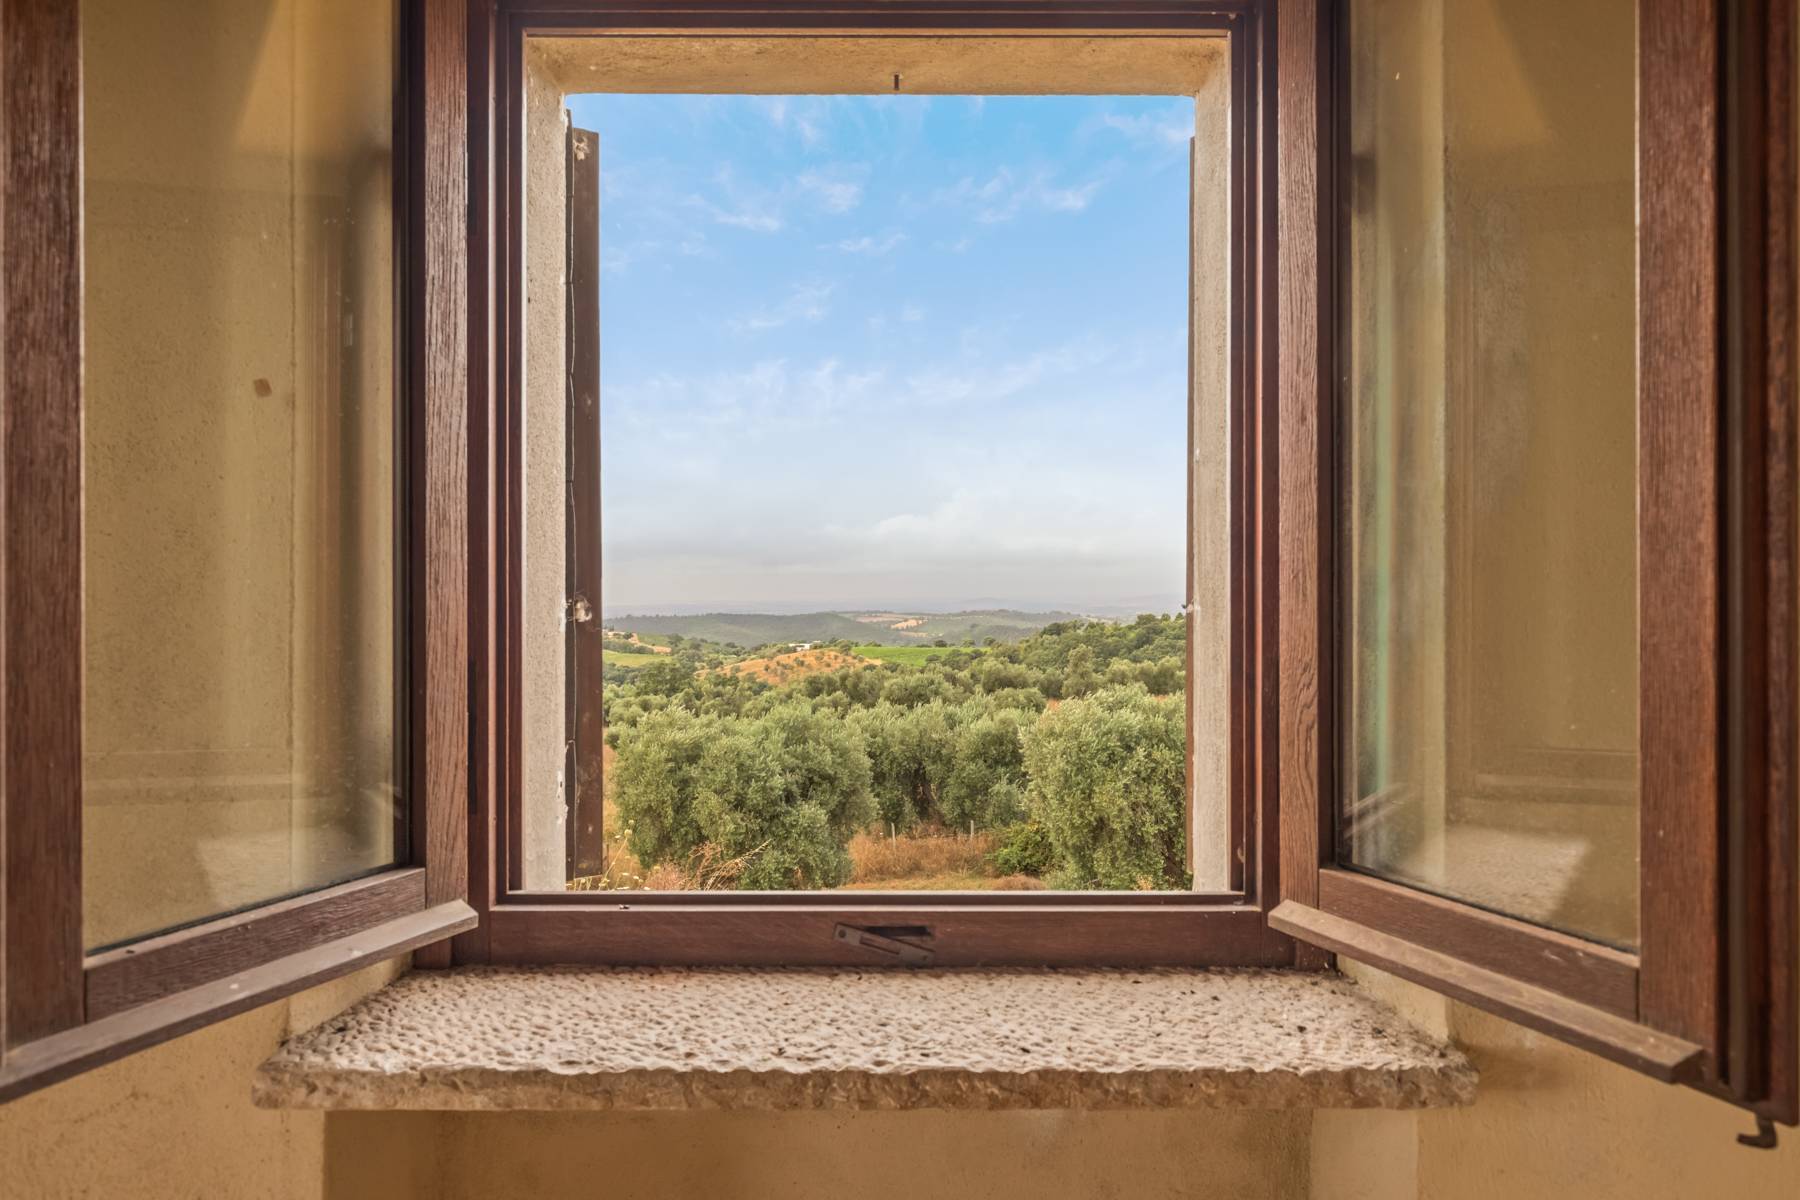 Panoramic stone farmhouse with olive groves and sea views